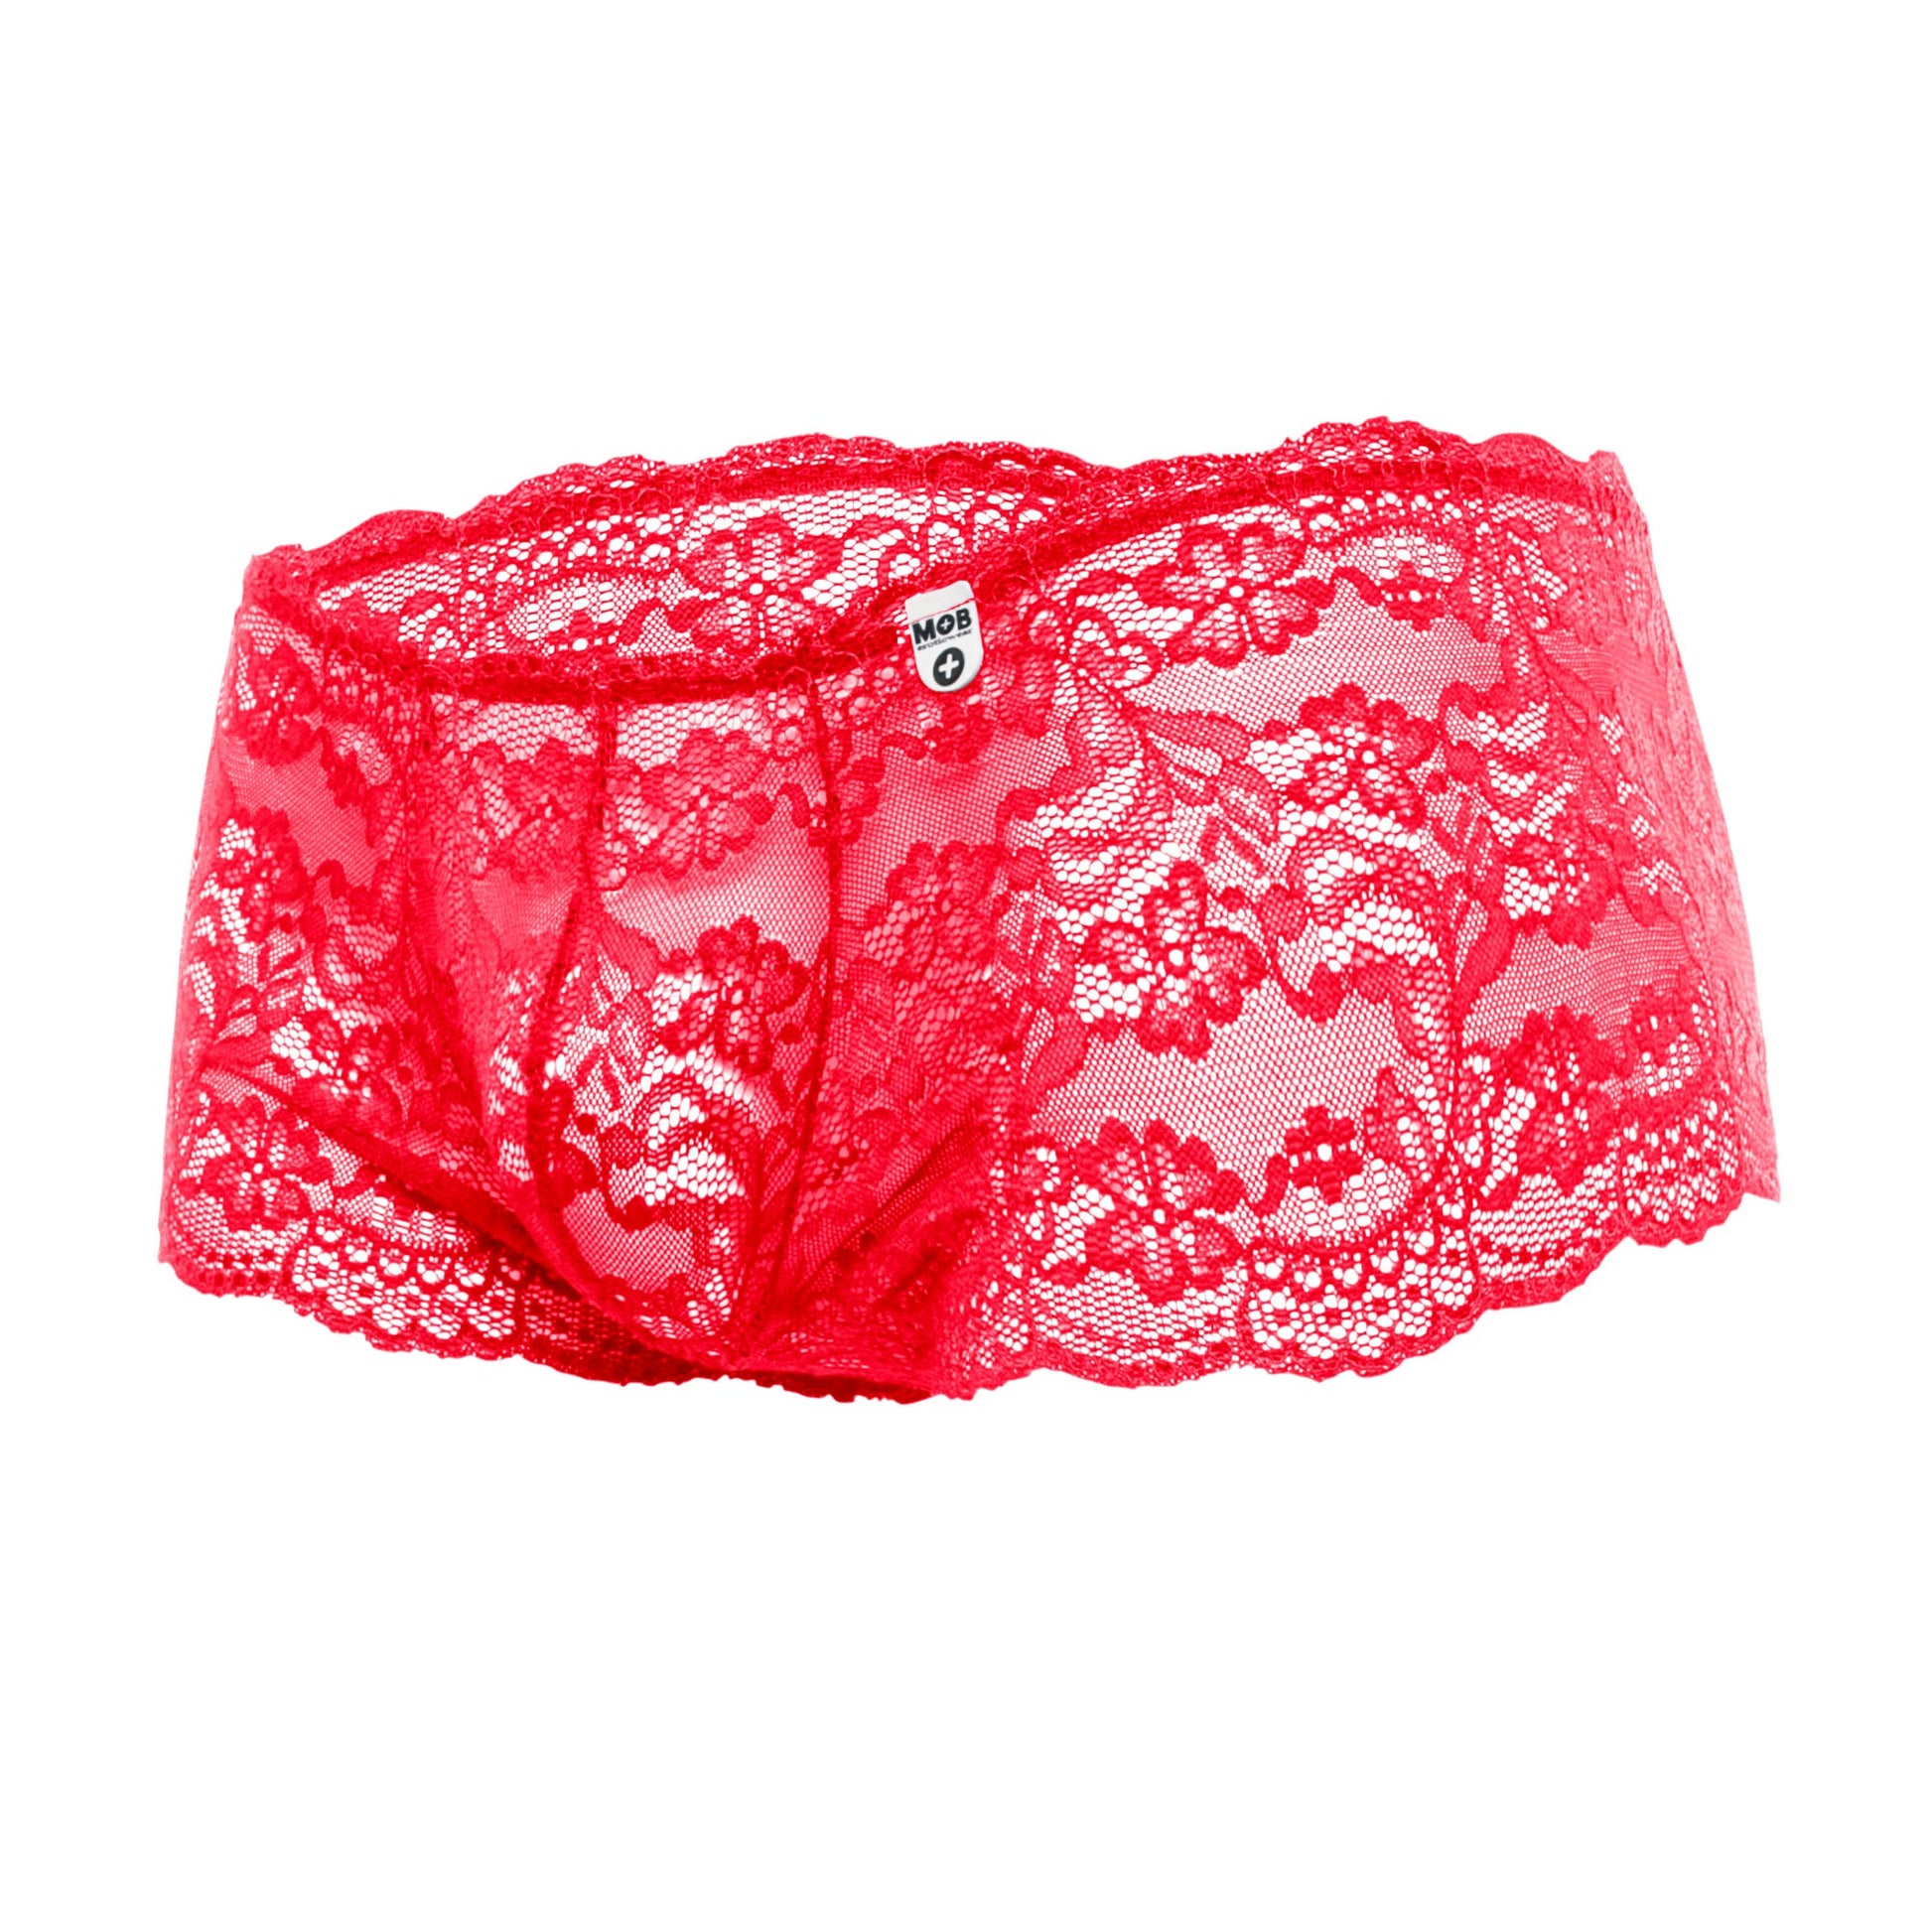 Malebasics Lace Boxer Boy Shorts in Red - Front View